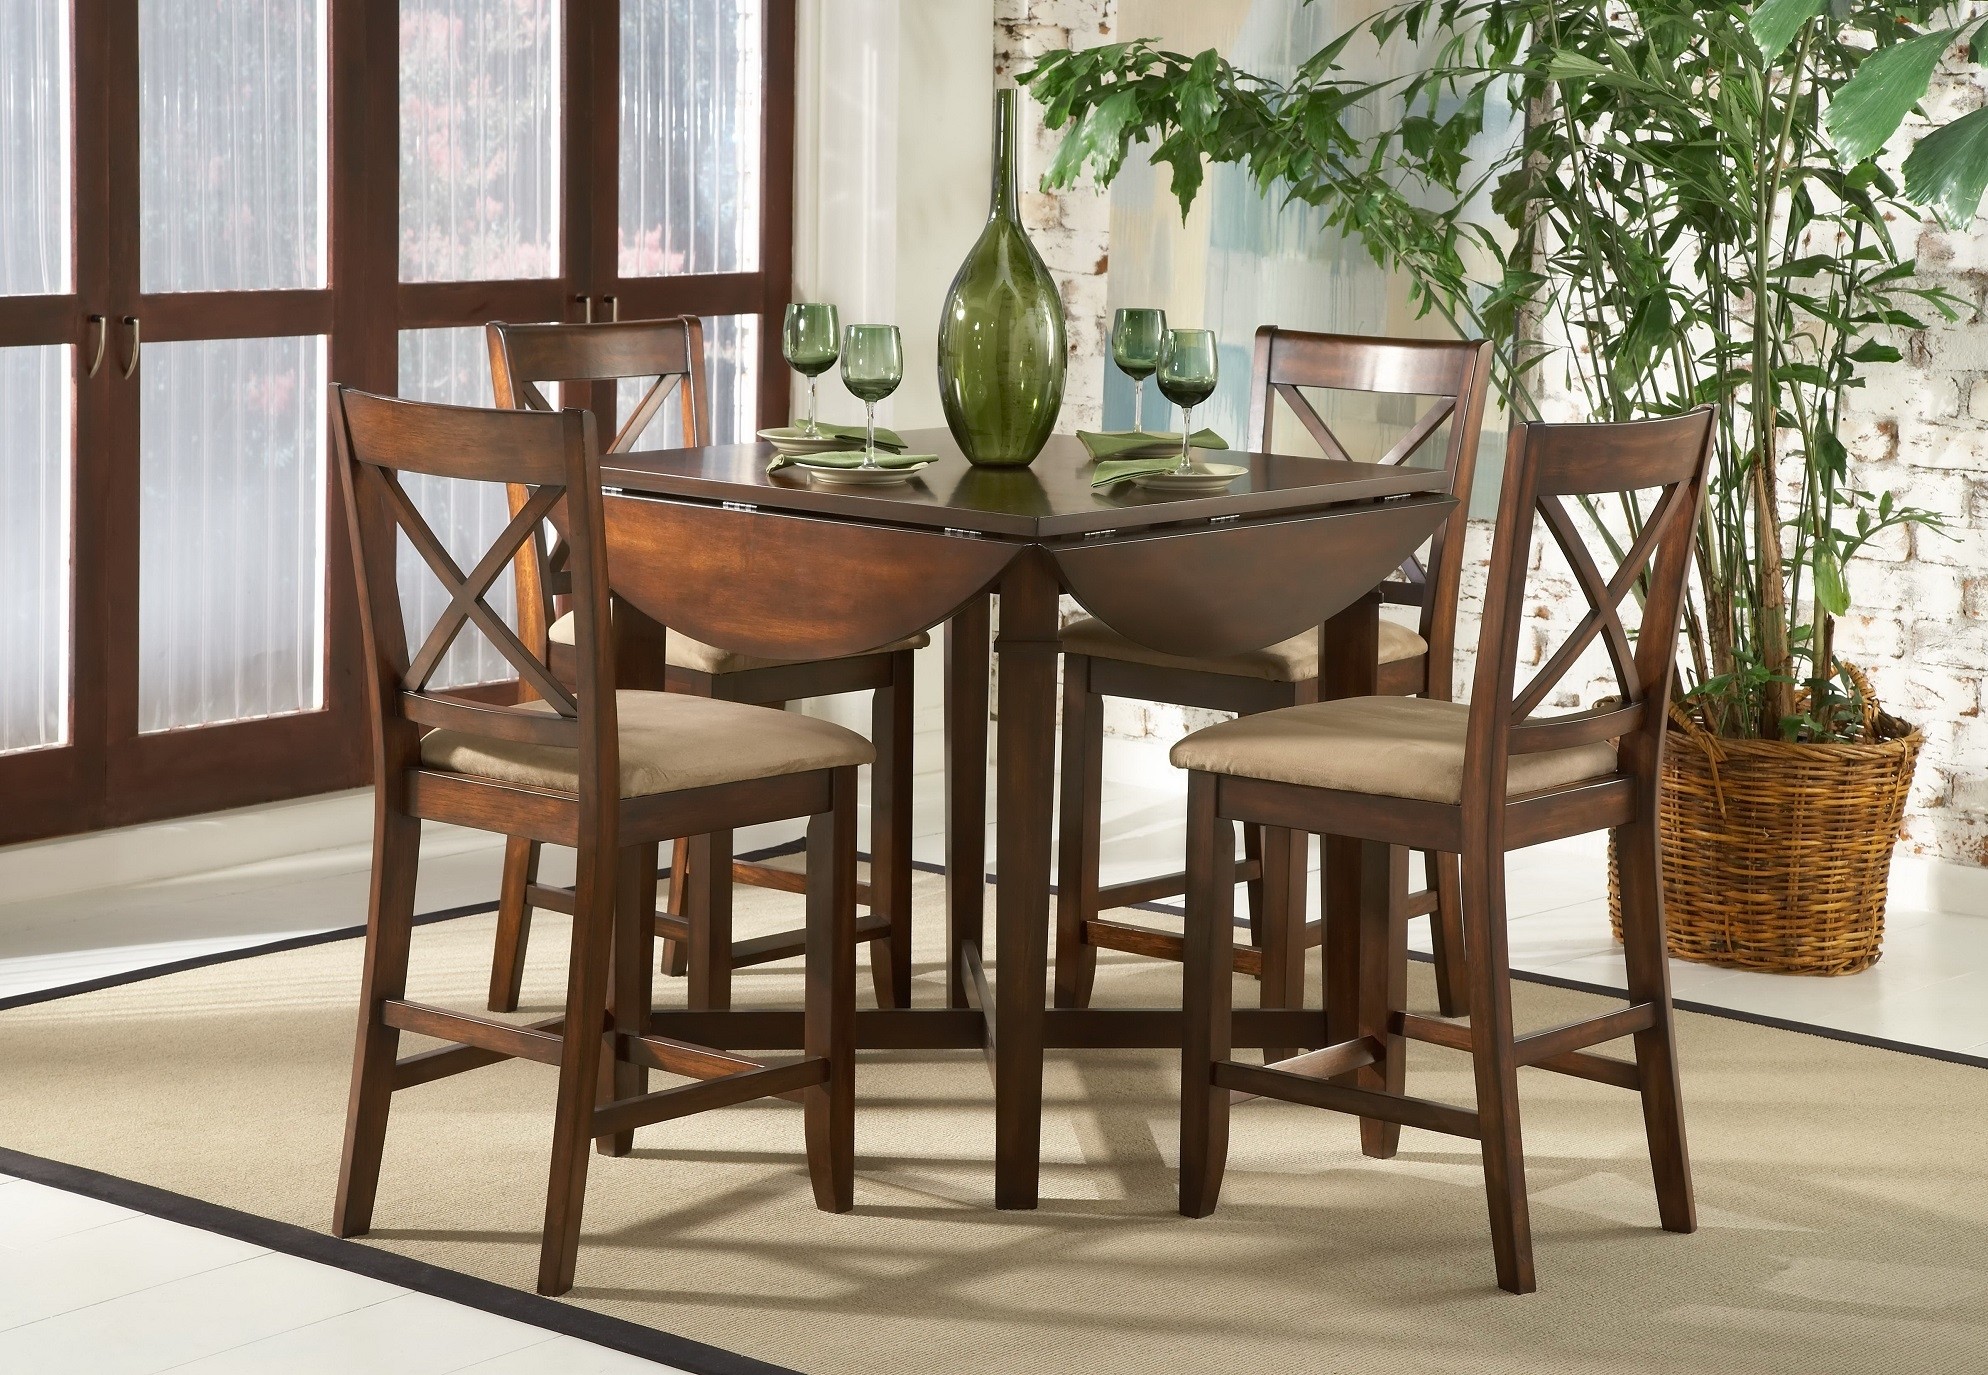 Gallery of choosing the dining room sets for small spaces